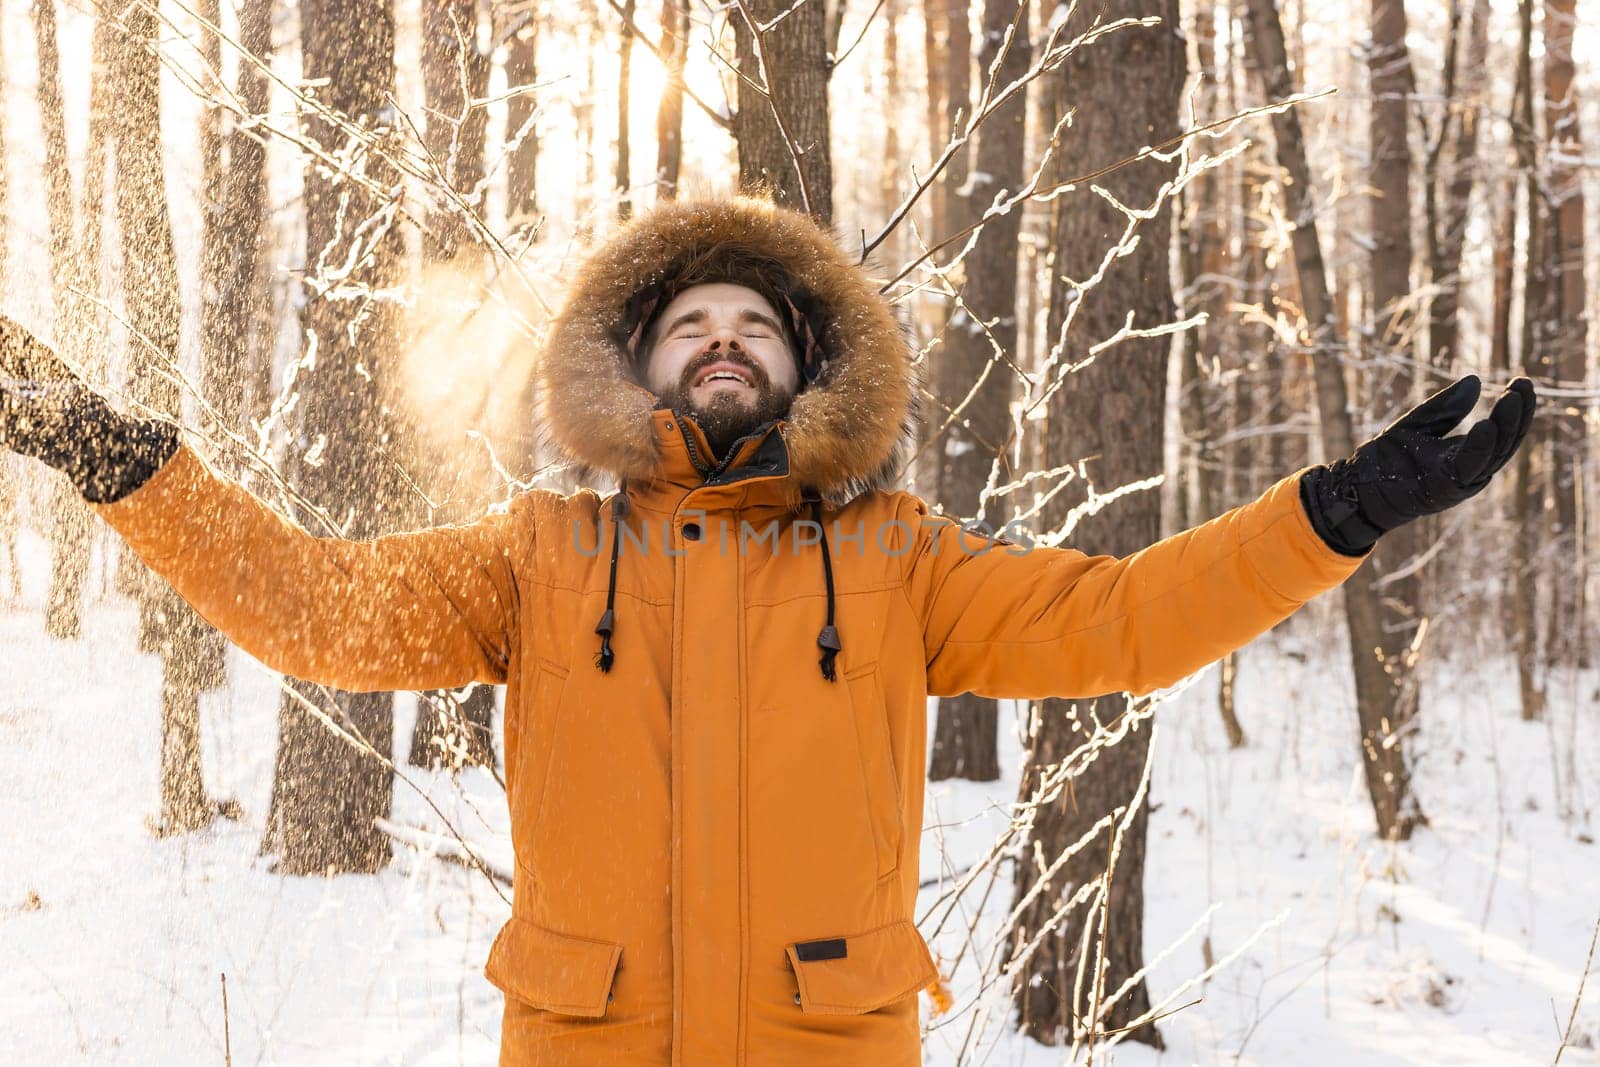 Happy bearded man in hat throws up snow in winter nature. Snowy cold season and holidays lifestyle concept. Freedom and fun by Satura86